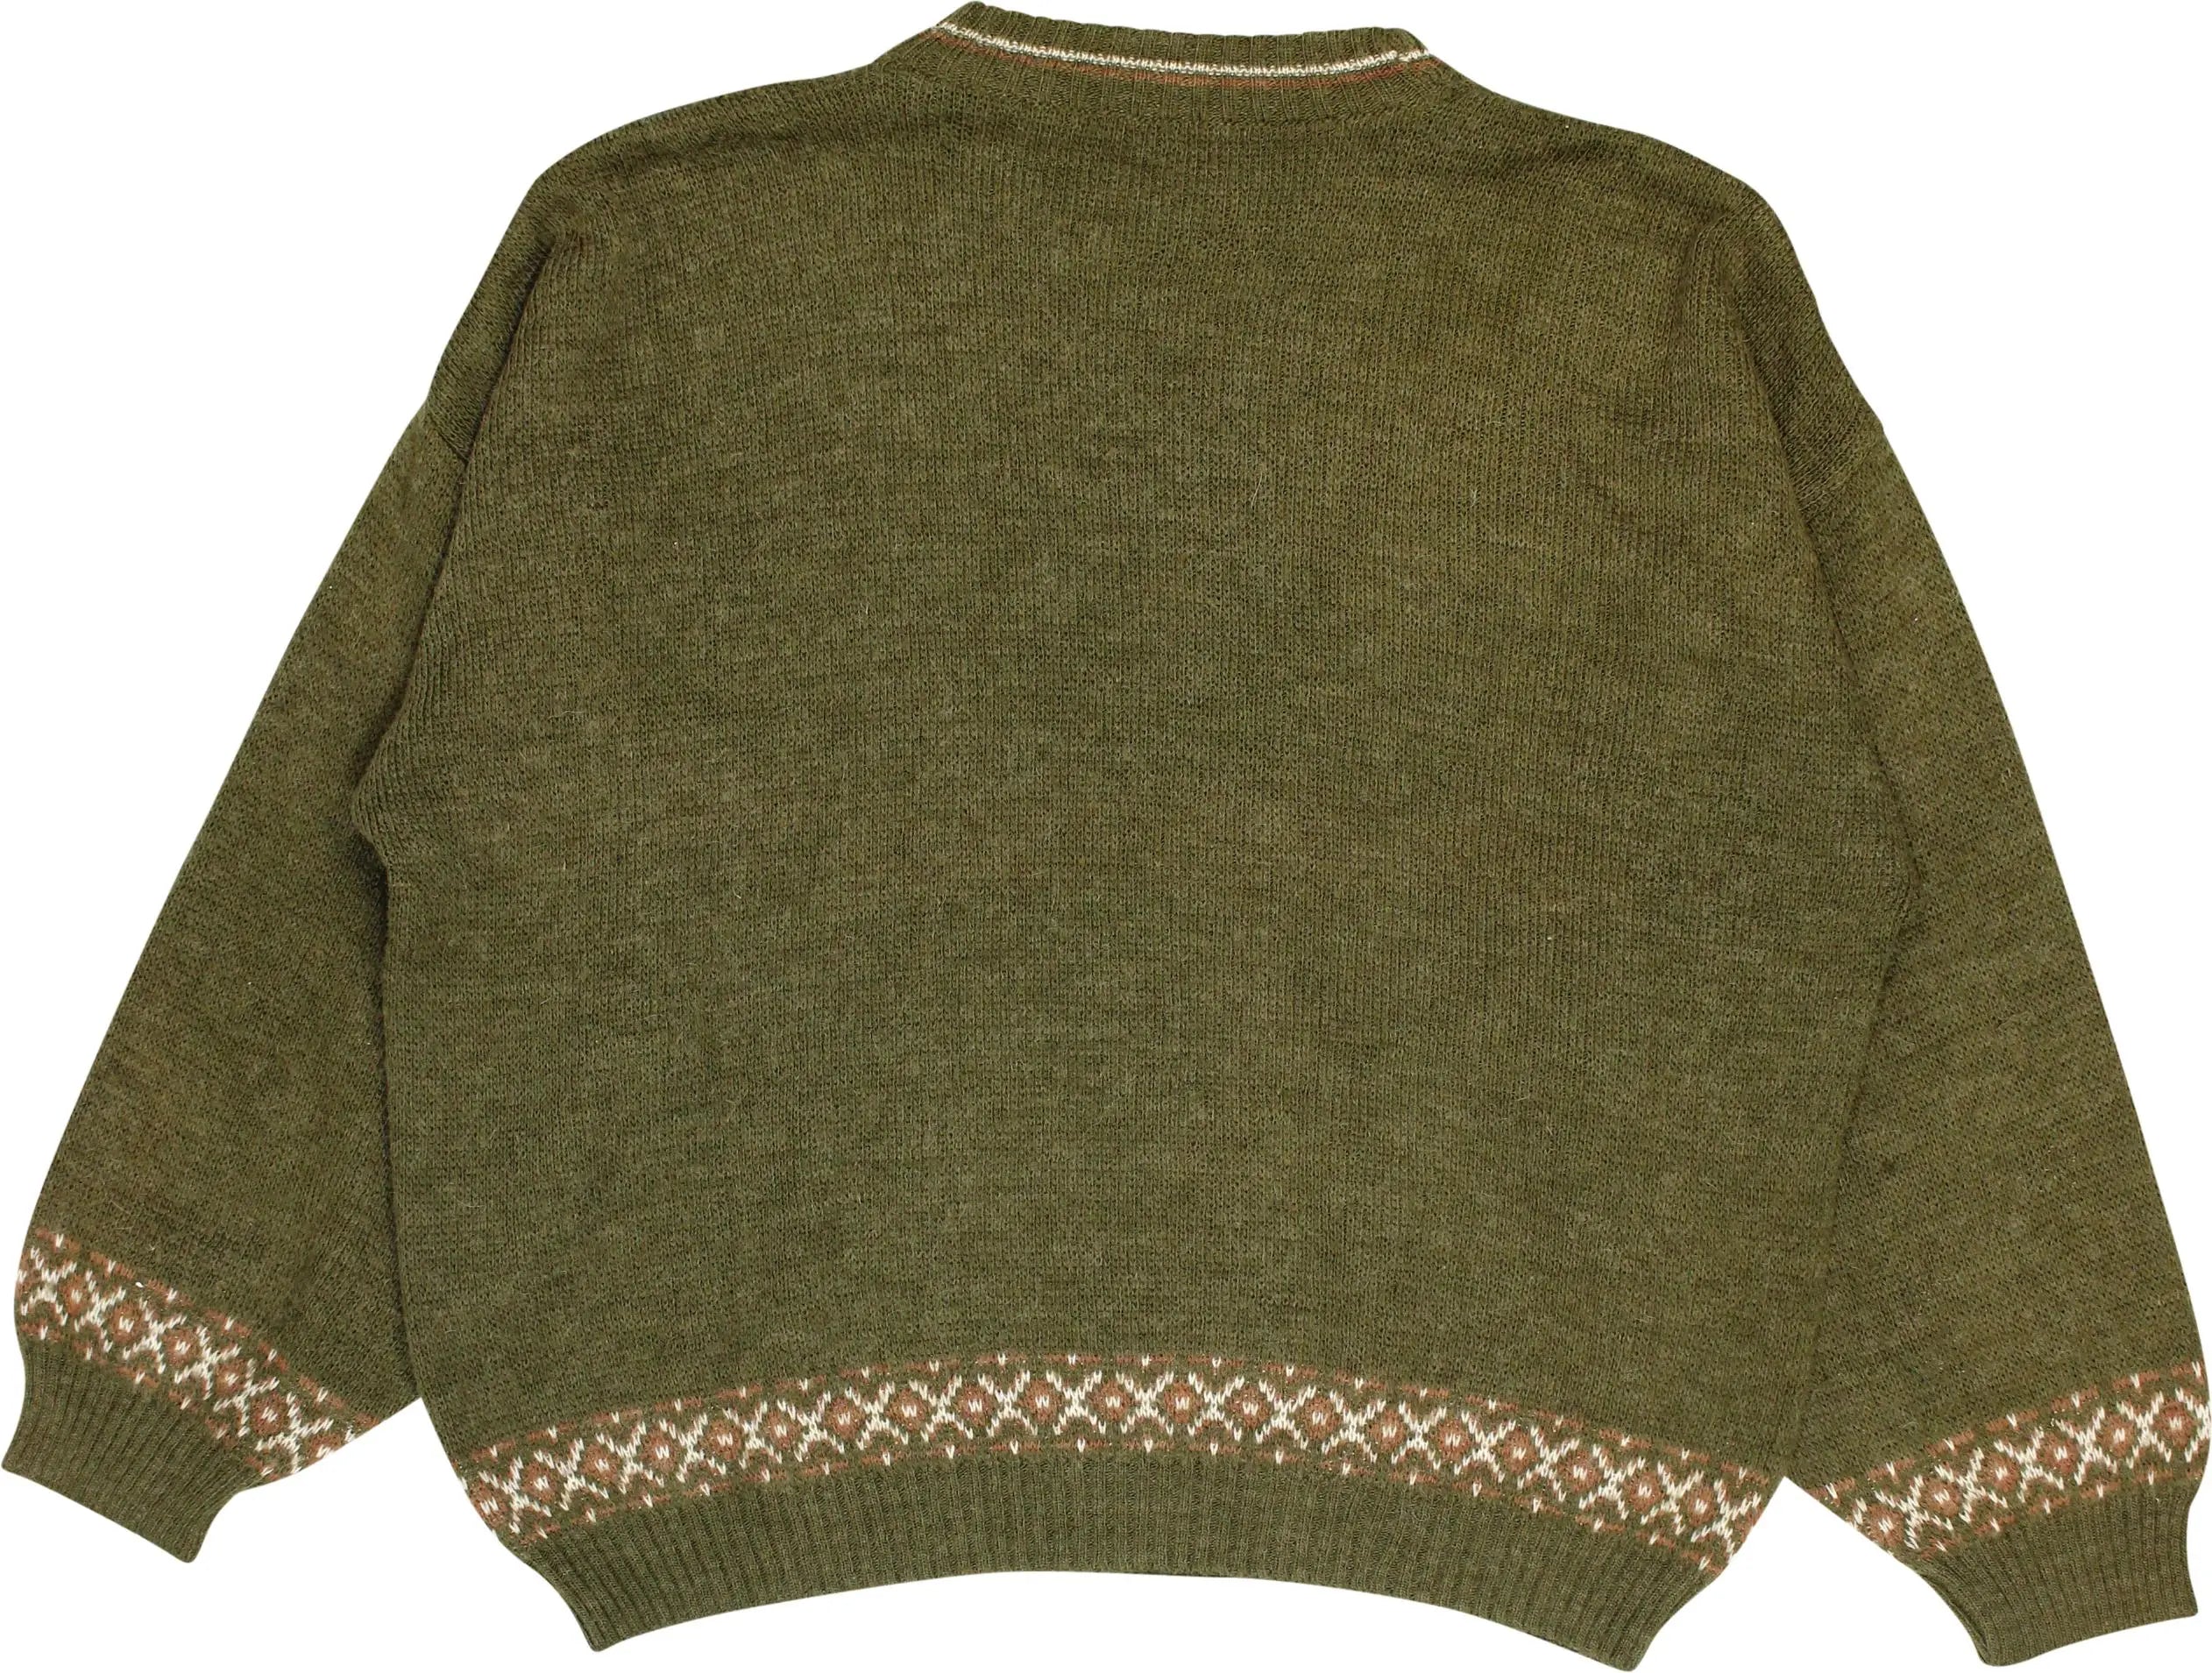 Unknown - Green Jumper- ThriftTale.com - Vintage and second handclothing